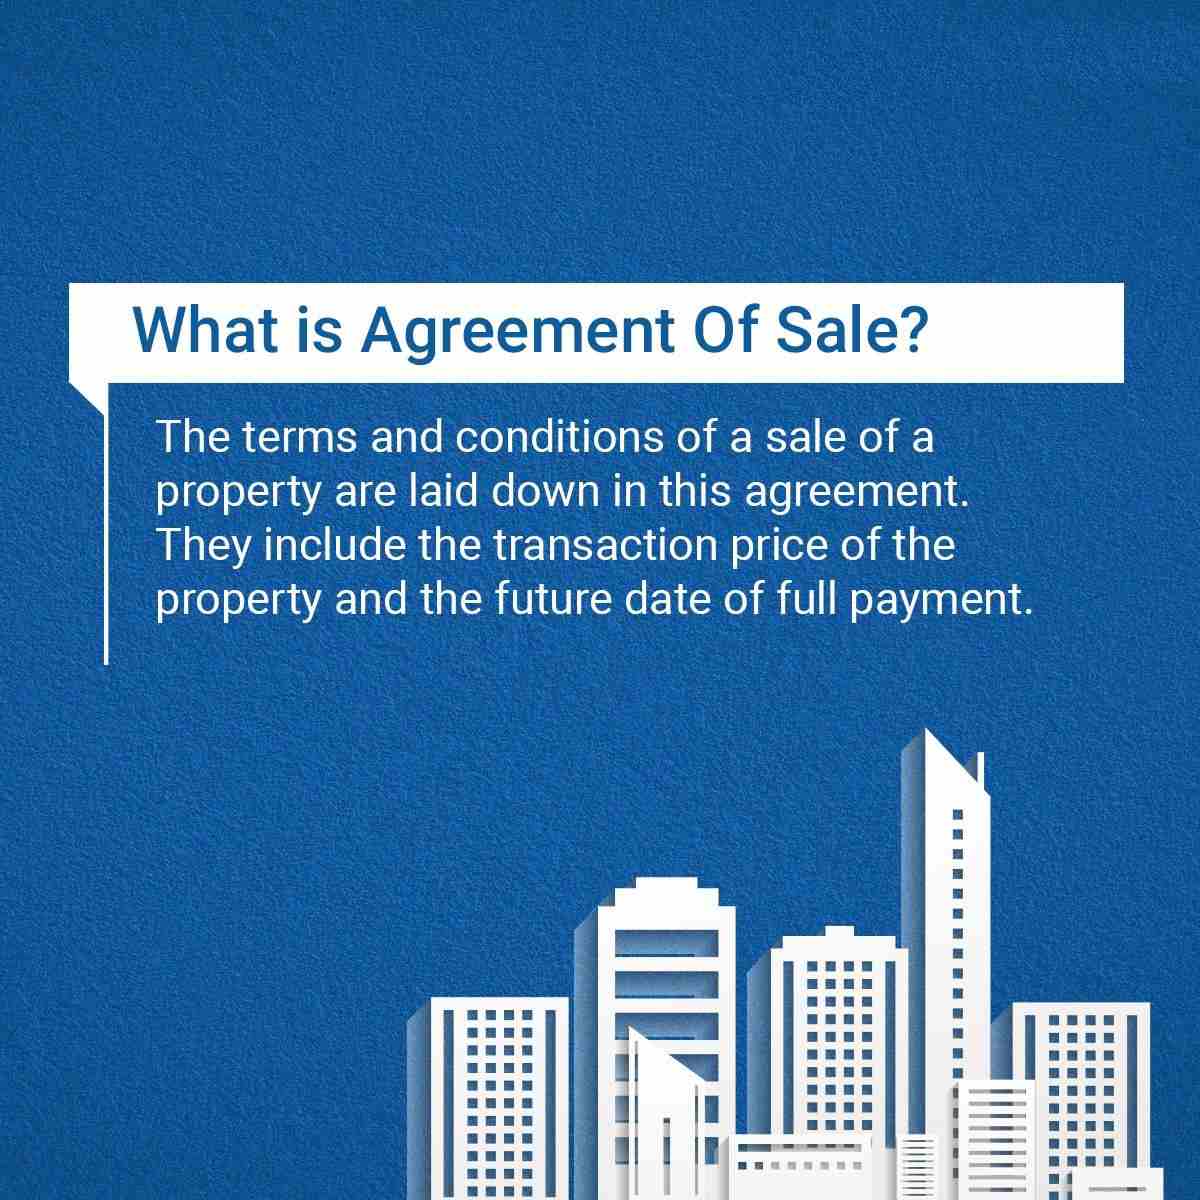 What is Agreement of Sale?